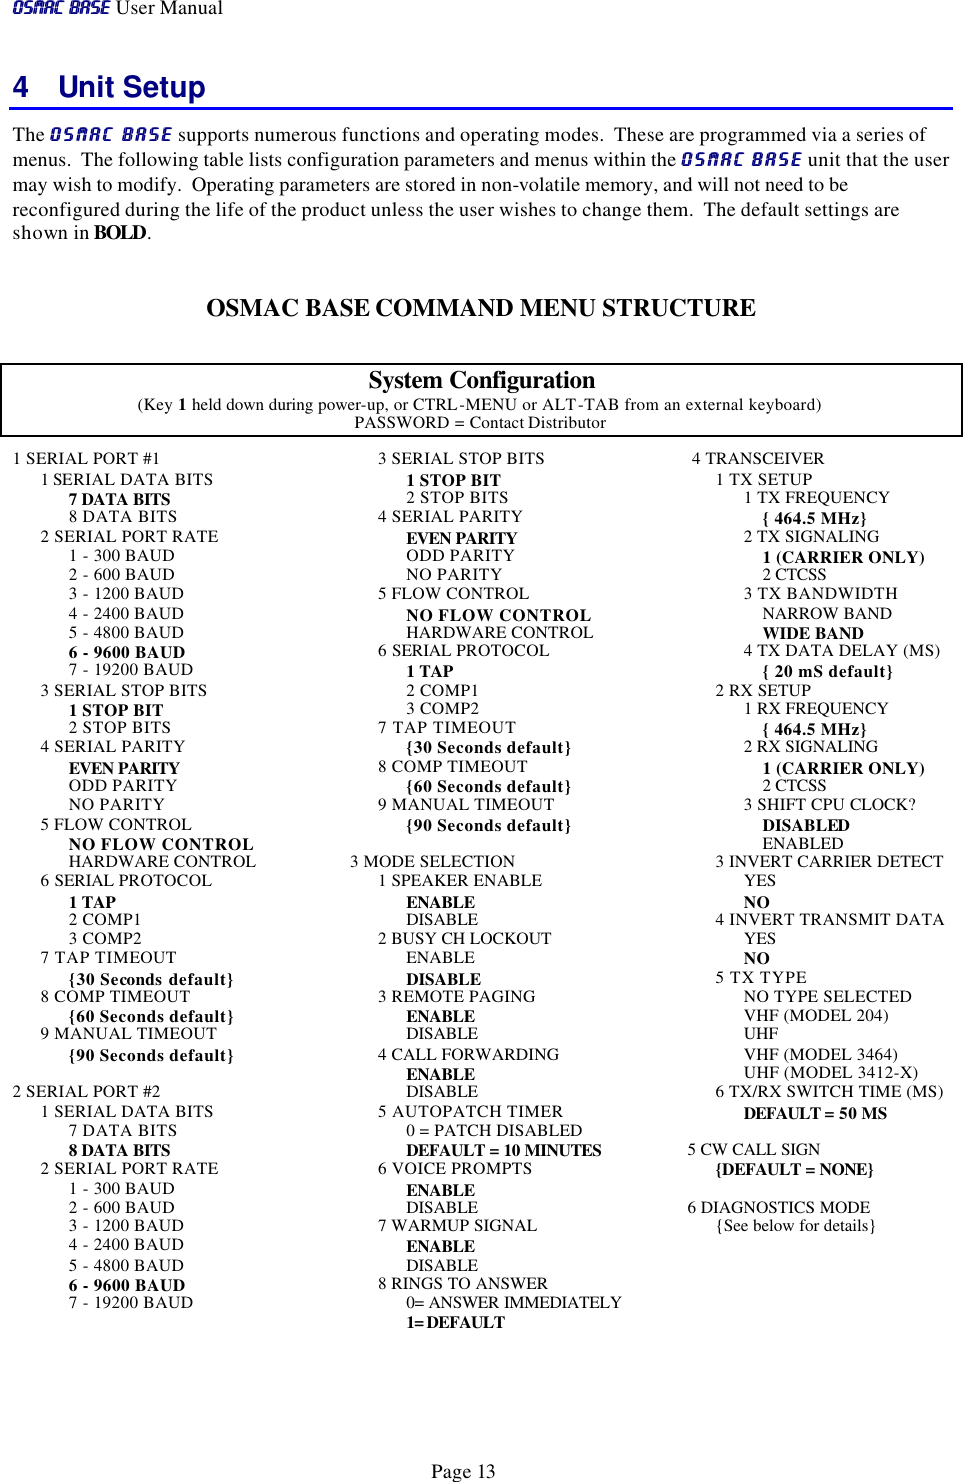 OSMAC BaseOSMAC Base User Manual      Page 13 4 Unit Setup The OSMAC BaseOSMAC Base supports numerous functions and operating modes.  These are programmed via a series of menus.  The following table lists configuration parameters and menus within the OSMAC BaseOSMAC Base unit that the user may wish to modify.  Operating parameters are stored in non-volatile memory, and will not need to be reconfigured during the life of the product unless the user wishes to change them.  The default settings are shown in BOLD.  OSMAC BASE COMMAND MENU STRUCTURE  System Configuration (Key 1 held down during power-up, or CTRL-MENU or ALT-TAB from an external keyboard) PASSWORD = Contact Distributor  1 SERIAL PORT #1      1 SERIAL DATA BITS   7 DATA BITS         8 DATA BITS       2 SERIAL PORT RATE           1 - 300 BAUD           2 - 600 BAUD           3 - 1200 BAUD           4 - 2400 BAUD           5 - 4800 BAUD           6 - 9600 BAUD                 7 - 19200 BAUD  3 SERIAL STOP BITS   1 STOP BIT             2 STOP BITS       4 SERIAL PARITY   EVEN PARITY             ODD PARITY             NO PARITY  5 FLOW CONTROL   NO FLOW CONTROL   HARDWARE CONTROL  6 SERIAL PROTOCOL           1 TAP           2 COMP1           3 COMP2  7 TAP TIMEOUT         {30 Seconds default}  8 COMP TIMEOUT   {60 Seconds default}  9 MANUAL TIMEOUT   {90 Seconds default}  2 SERIAL PORT #2      1 SERIAL DATA BITS   7 DATA BITS        8 DATA BITS  2 SERIAL PORT RATE           1 - 300 BAUD           2 - 600 BAUD           3 - 1200 BAUD           4 - 2400 BAUD           5 - 4800 BAUD           6 - 9600 BAUD                 7 - 19200 BAUD       3 SERIAL STOP BITS   1 STOP BIT             2 STOP BITS       4 SERIAL PARITY   EVEN PARITY             ODD PARITY             NO PARITY  5 FLOW CONTROL   NO FLOW CONTROL   HARDWARE CONTROL  6 SERIAL PROTOCOL           1 TAP           2 COMP1           3 COMP2  7 TAP TIMEOUT         {30 Seconds default}  8 COMP TIMEOUT   {60 Seconds default}  9 MANUAL TIMEOUT   {90 Seconds default}  3 MODE SELECTION  1 SPEAKER ENABLE   ENABLE   DISABLE    2 BUSY CH LOCKOUT   ENABLE   DISABLE    3 REMOTE PAGING   ENABLE   DISABLE    4 CALL FORWARDING   ENABLE   DISABLE    5 AUTOPATCH TIMER   0 = PATCH DISABLED   DEFAULT = 10 MINUTES    6 VOICE PROMPTS   ENABLE   DISABLE    7 WARMUP SIGNAL   ENABLE   DISABLE   8 RINGS TO ANSWER   0= ANSWER IMMEDIATELY   1= DEFAULT    4 TRANSCEIVER  1 TX SETUP           1 TX FREQUENCY    { 464.5 MHz}   2 TX SIGNALING               1 (CARRIER ONLY)               2 CTCSS           3 TX BANDWIDTH    NARROW BAND                 WIDE BAND   4 TX DATA DELAY (MS)    { 20 mS default} 2 RX SETUP    1 RX FREQUENCY     { 464.5 MHz}  2 RX SIGNALING     1 (CARRIER ONLY)     2 CTCSS  3 SHIFT CPU CLOCK?     DISABLED     ENABLED 3 INVERT CARRIER DETECT    YES   NO  4 INVERT TRANSMIT DATA   YES   NO  5 TX TYPE   NO TYPE SELECTED    VHF (MODEL 204)   UHF   VHF (MODEL 3464)   UHF (MODEL 3412-X)  6 TX/RX SWITCH TIME (MS)   DEFAULT = 50 MS  5 CW CALL SIGN  {DEFAULT = NONE}    6 DIAGNOSTICS MODE  {See below for details}   